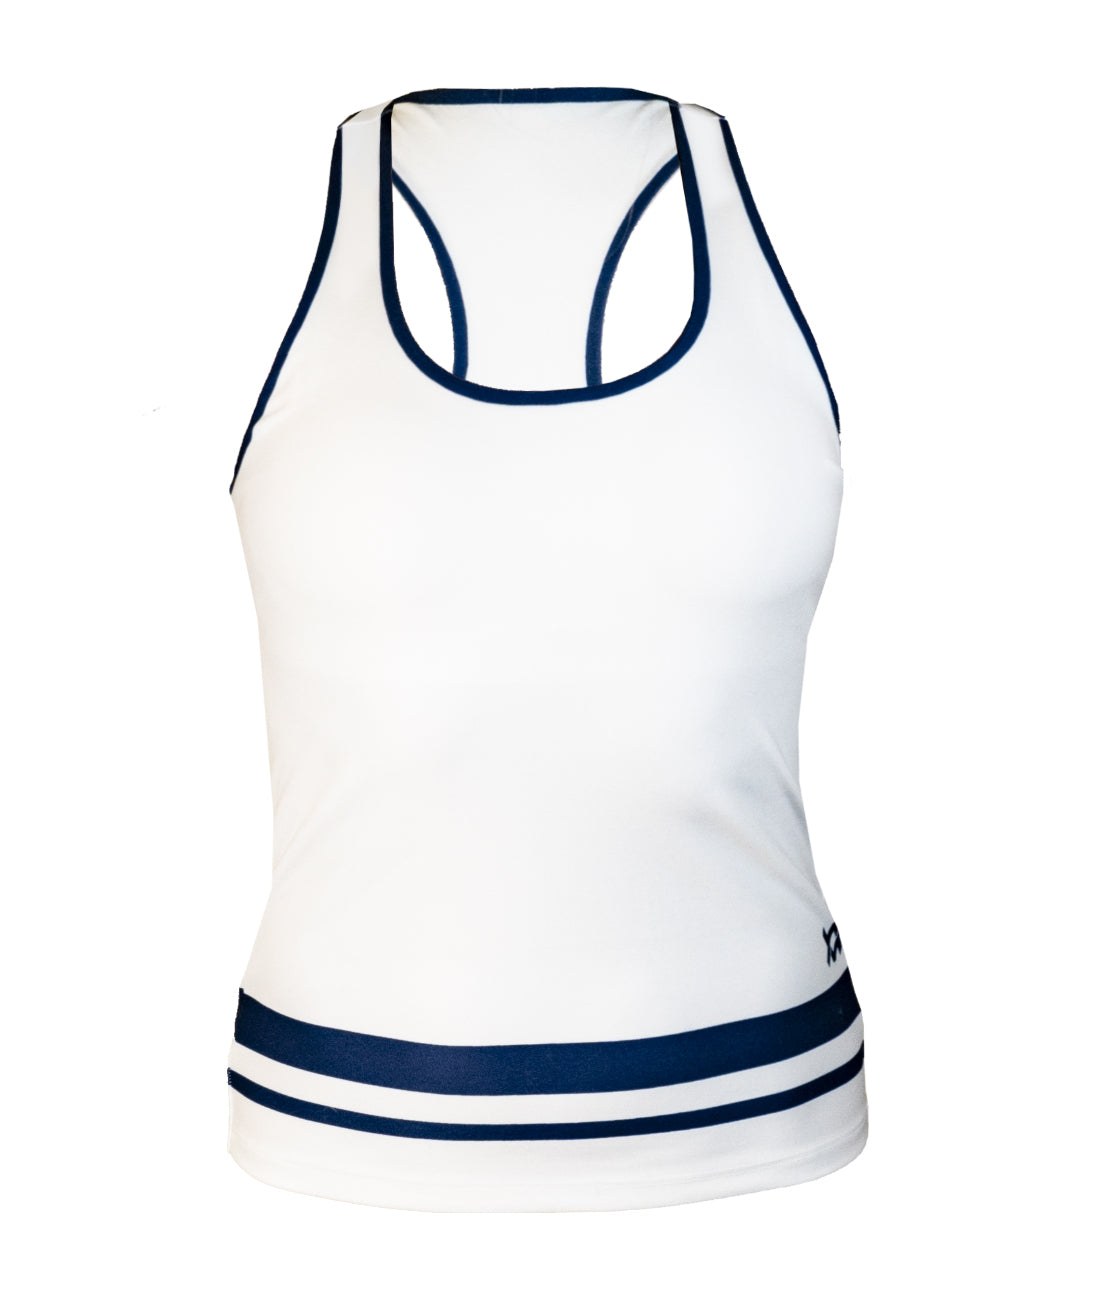 Women's US Racer Tank (Only available in the USA)